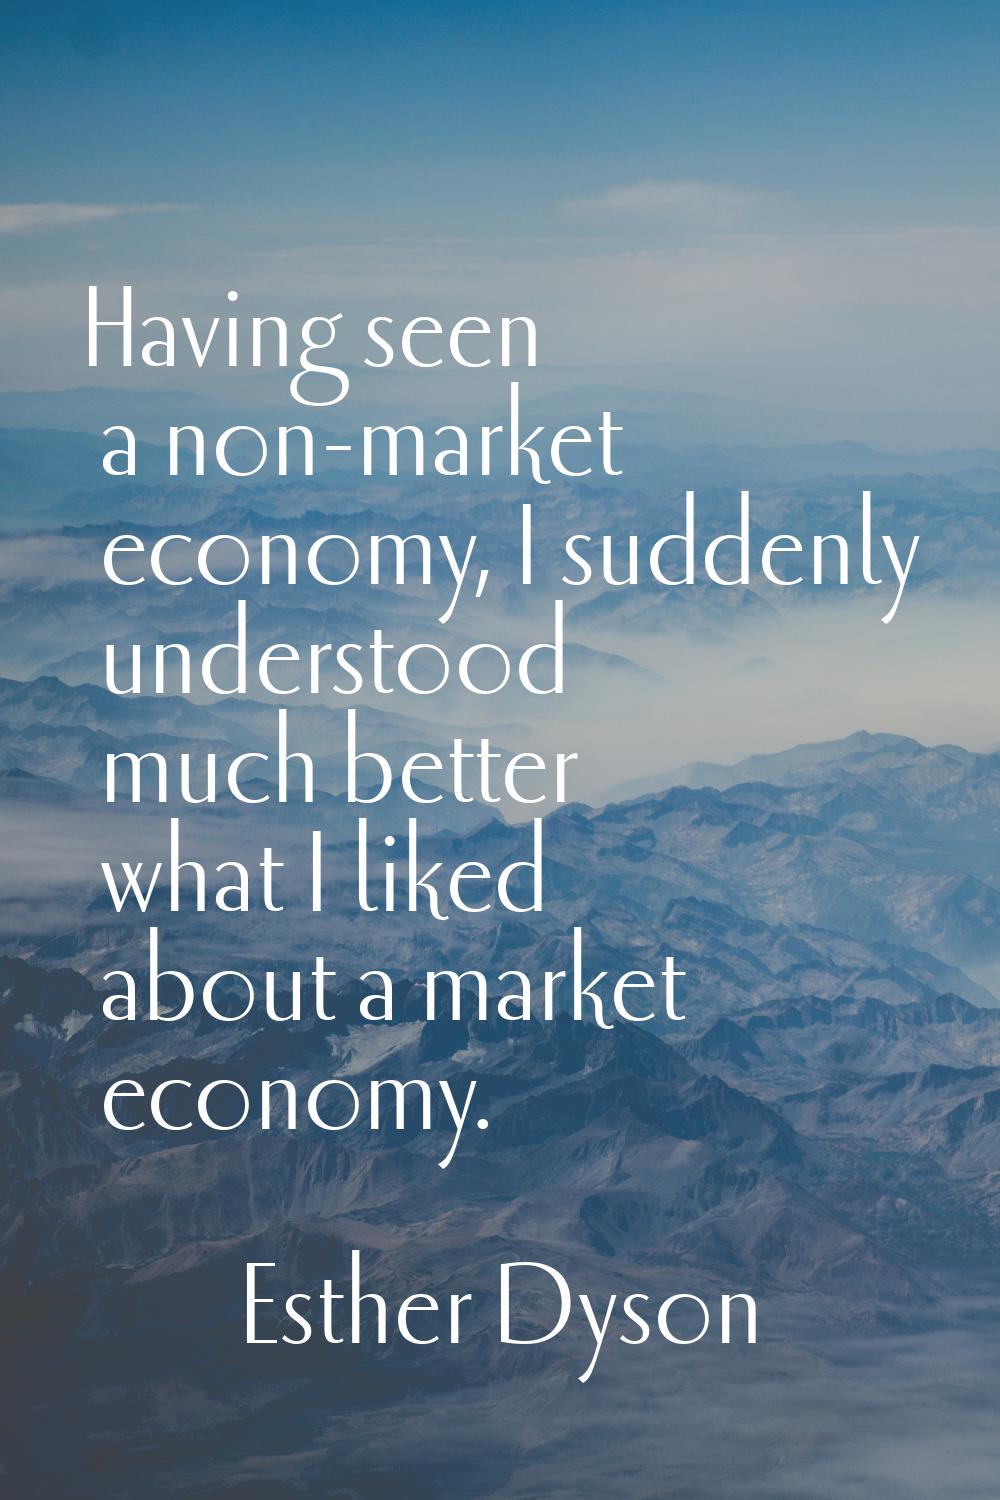 Having seen a non-market economy, I suddenly understood much better what I liked about a market eco